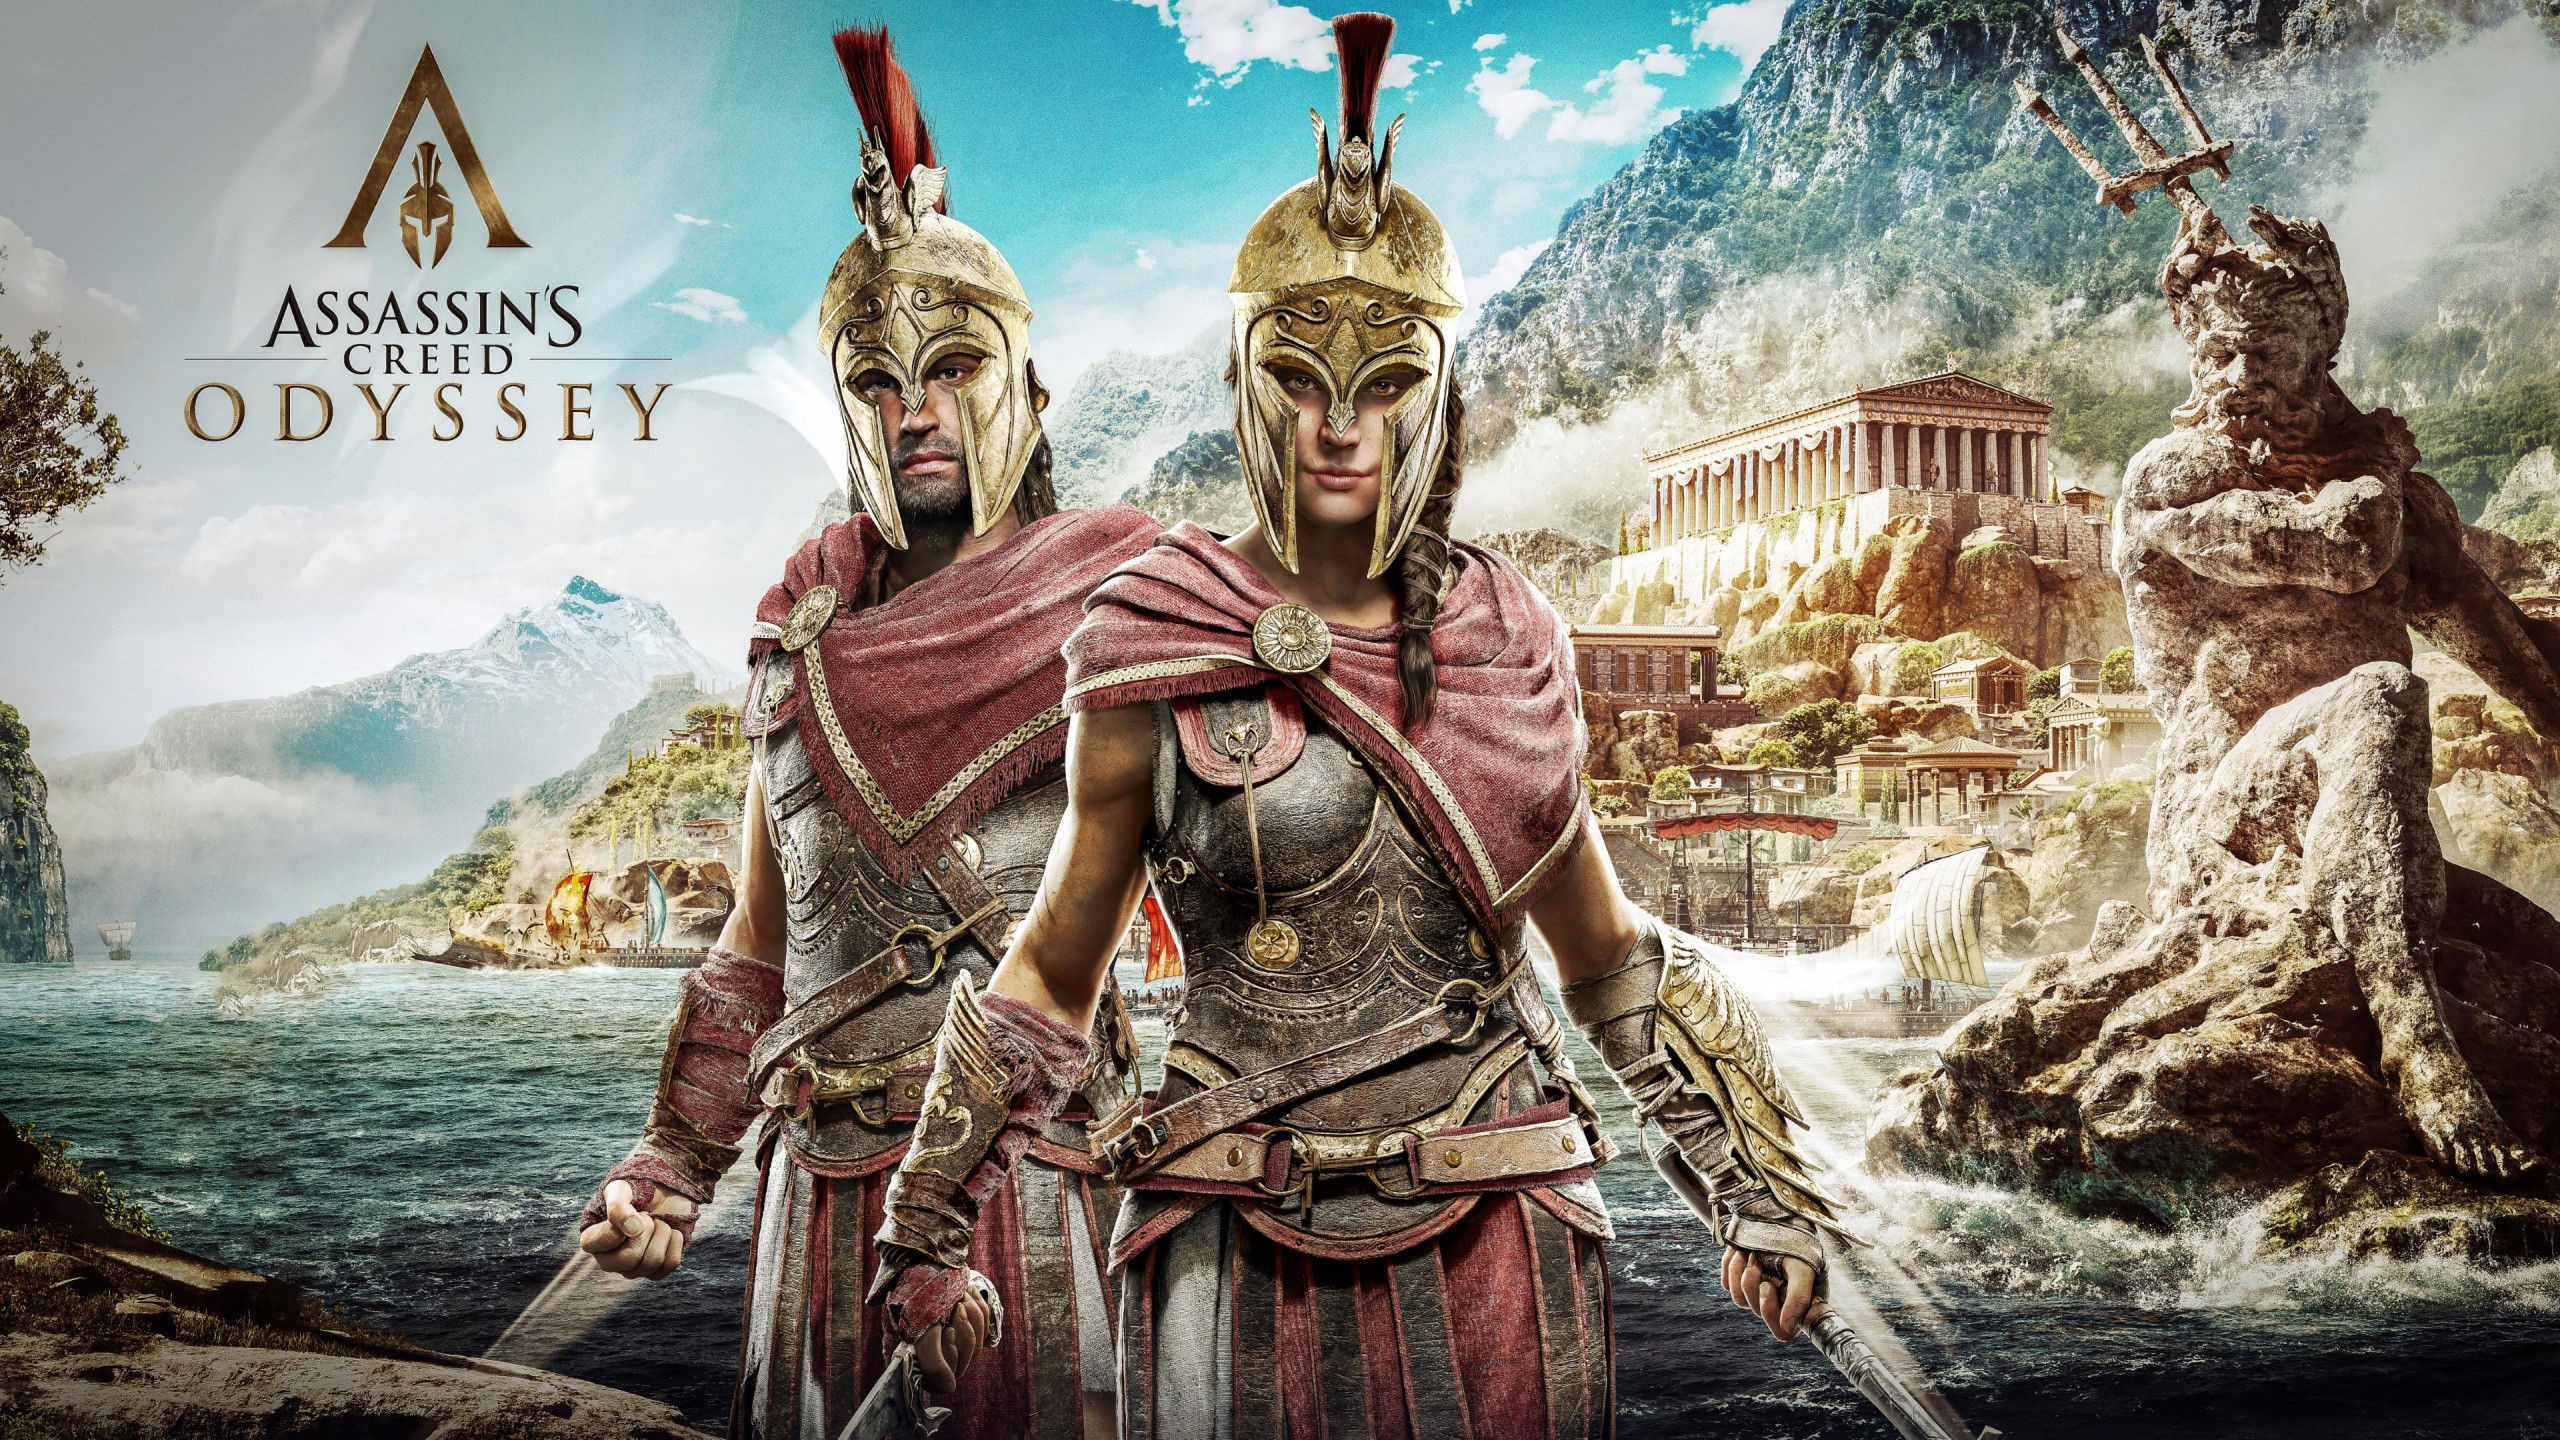 Assassin's Creed Odyssey poster wallpaper 2560x1440